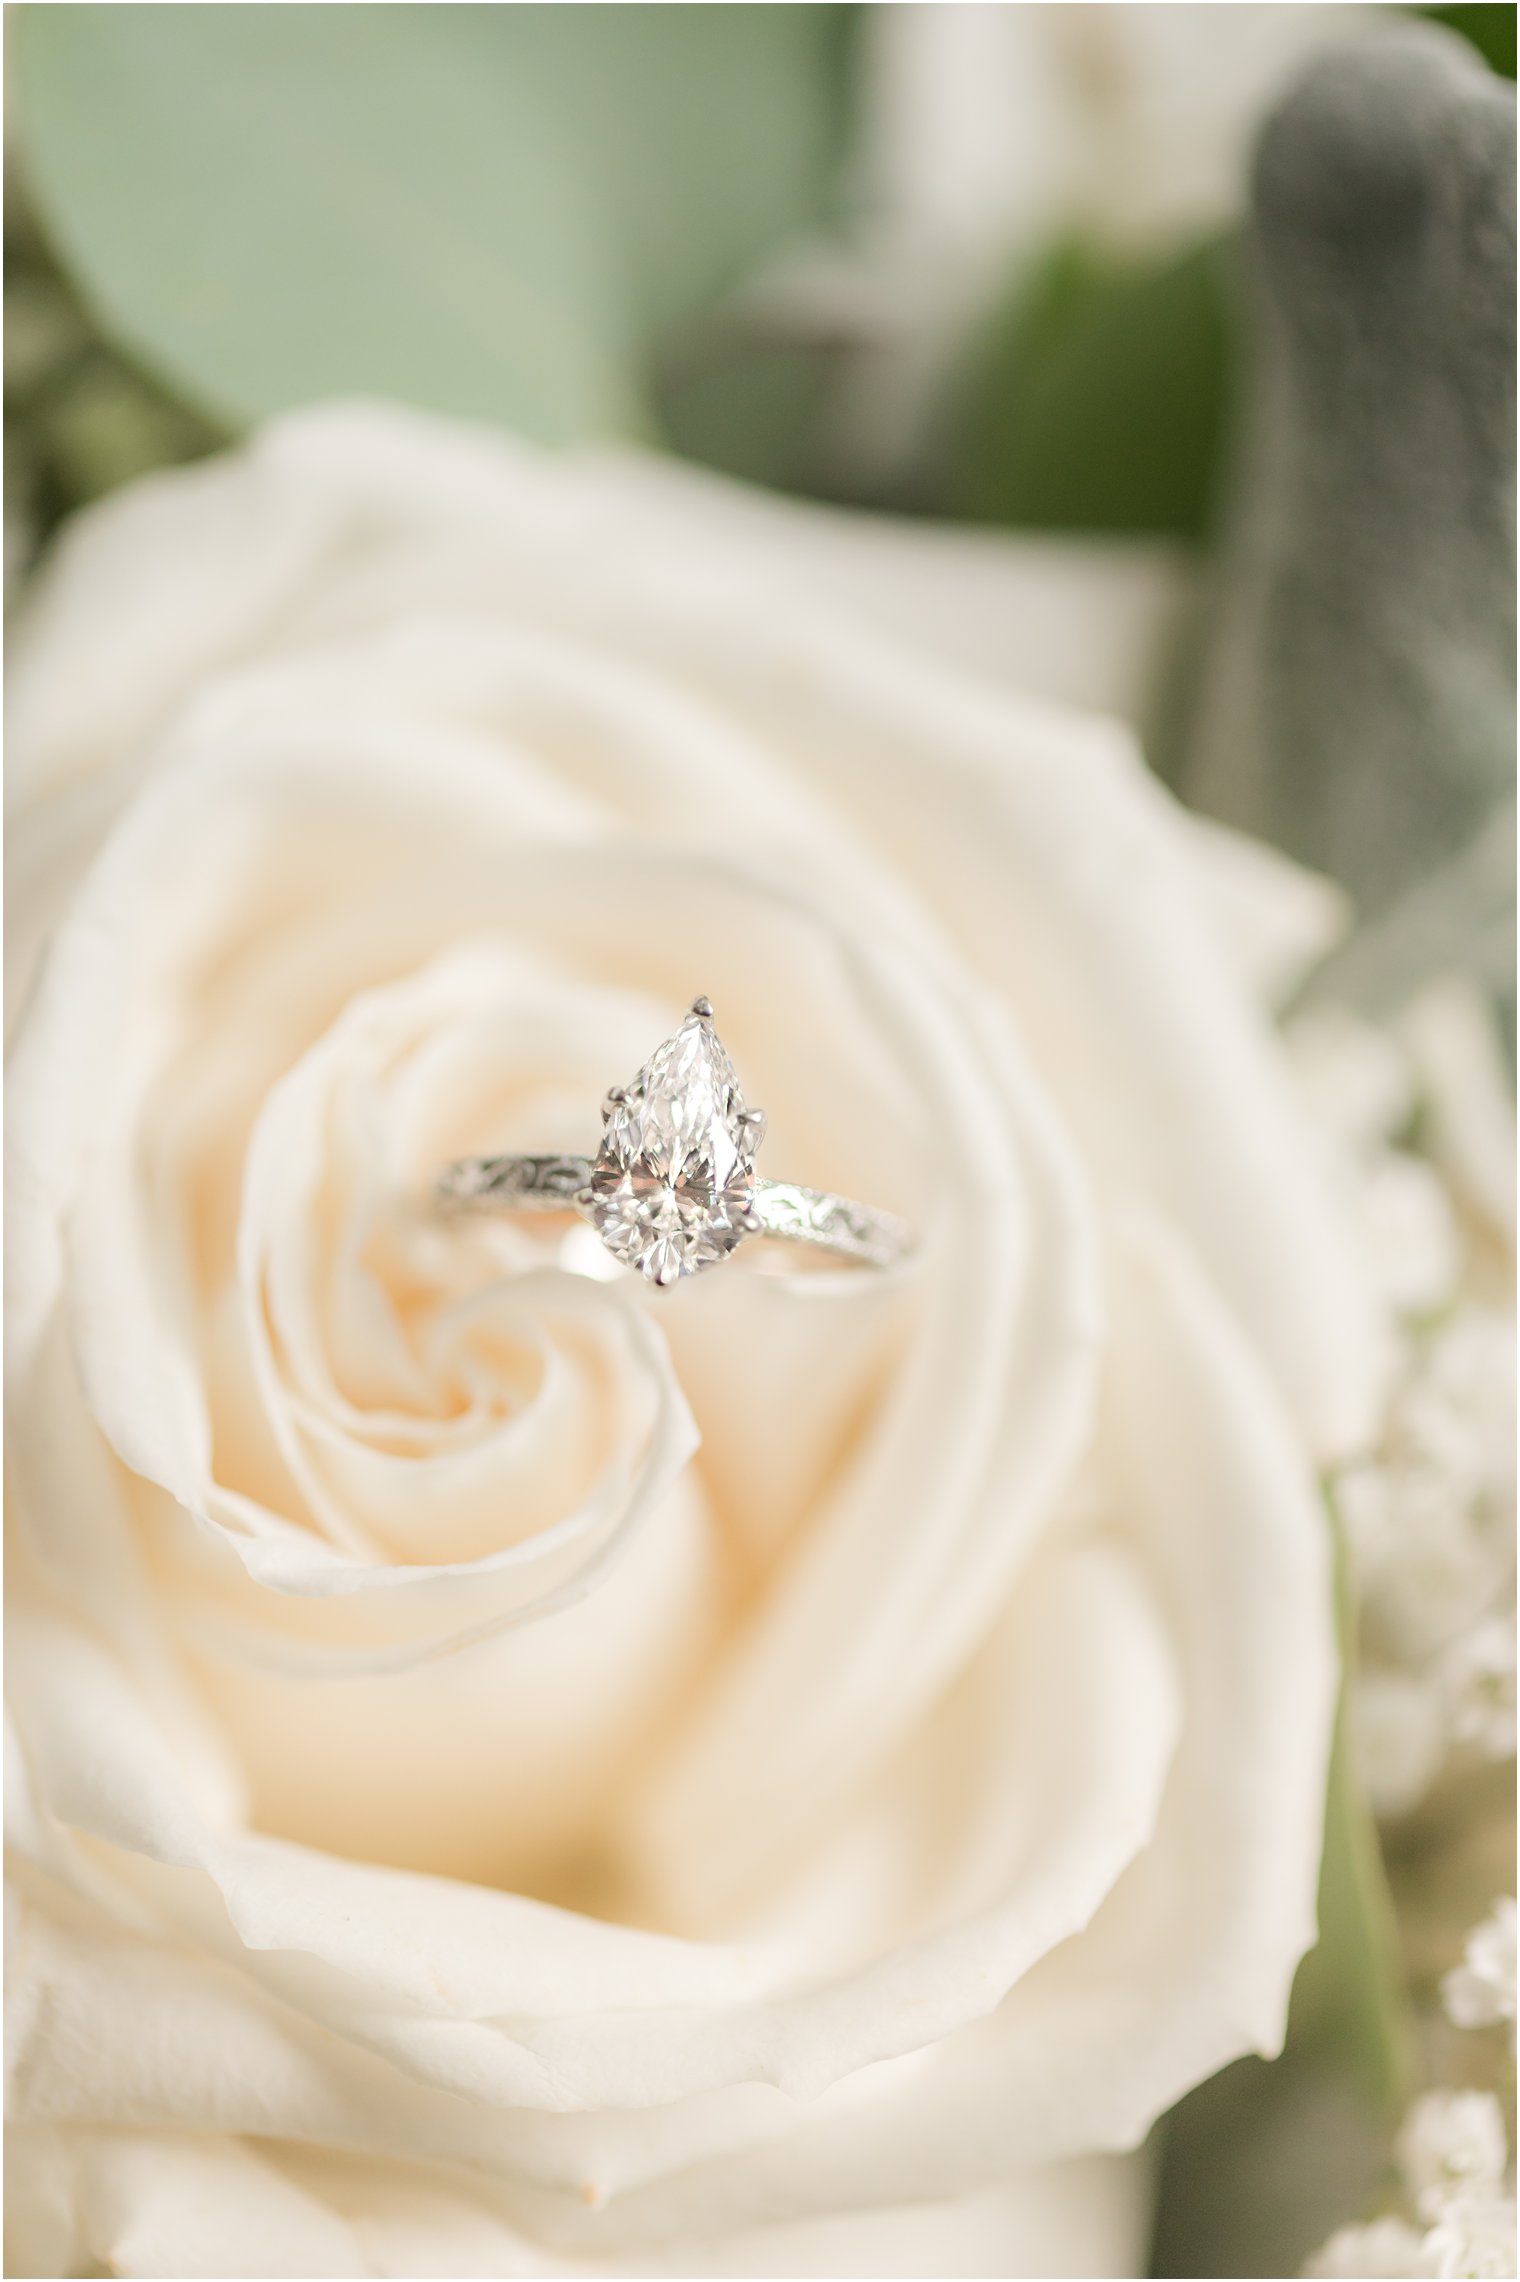 pear shaped diamond ring sits in white rose 